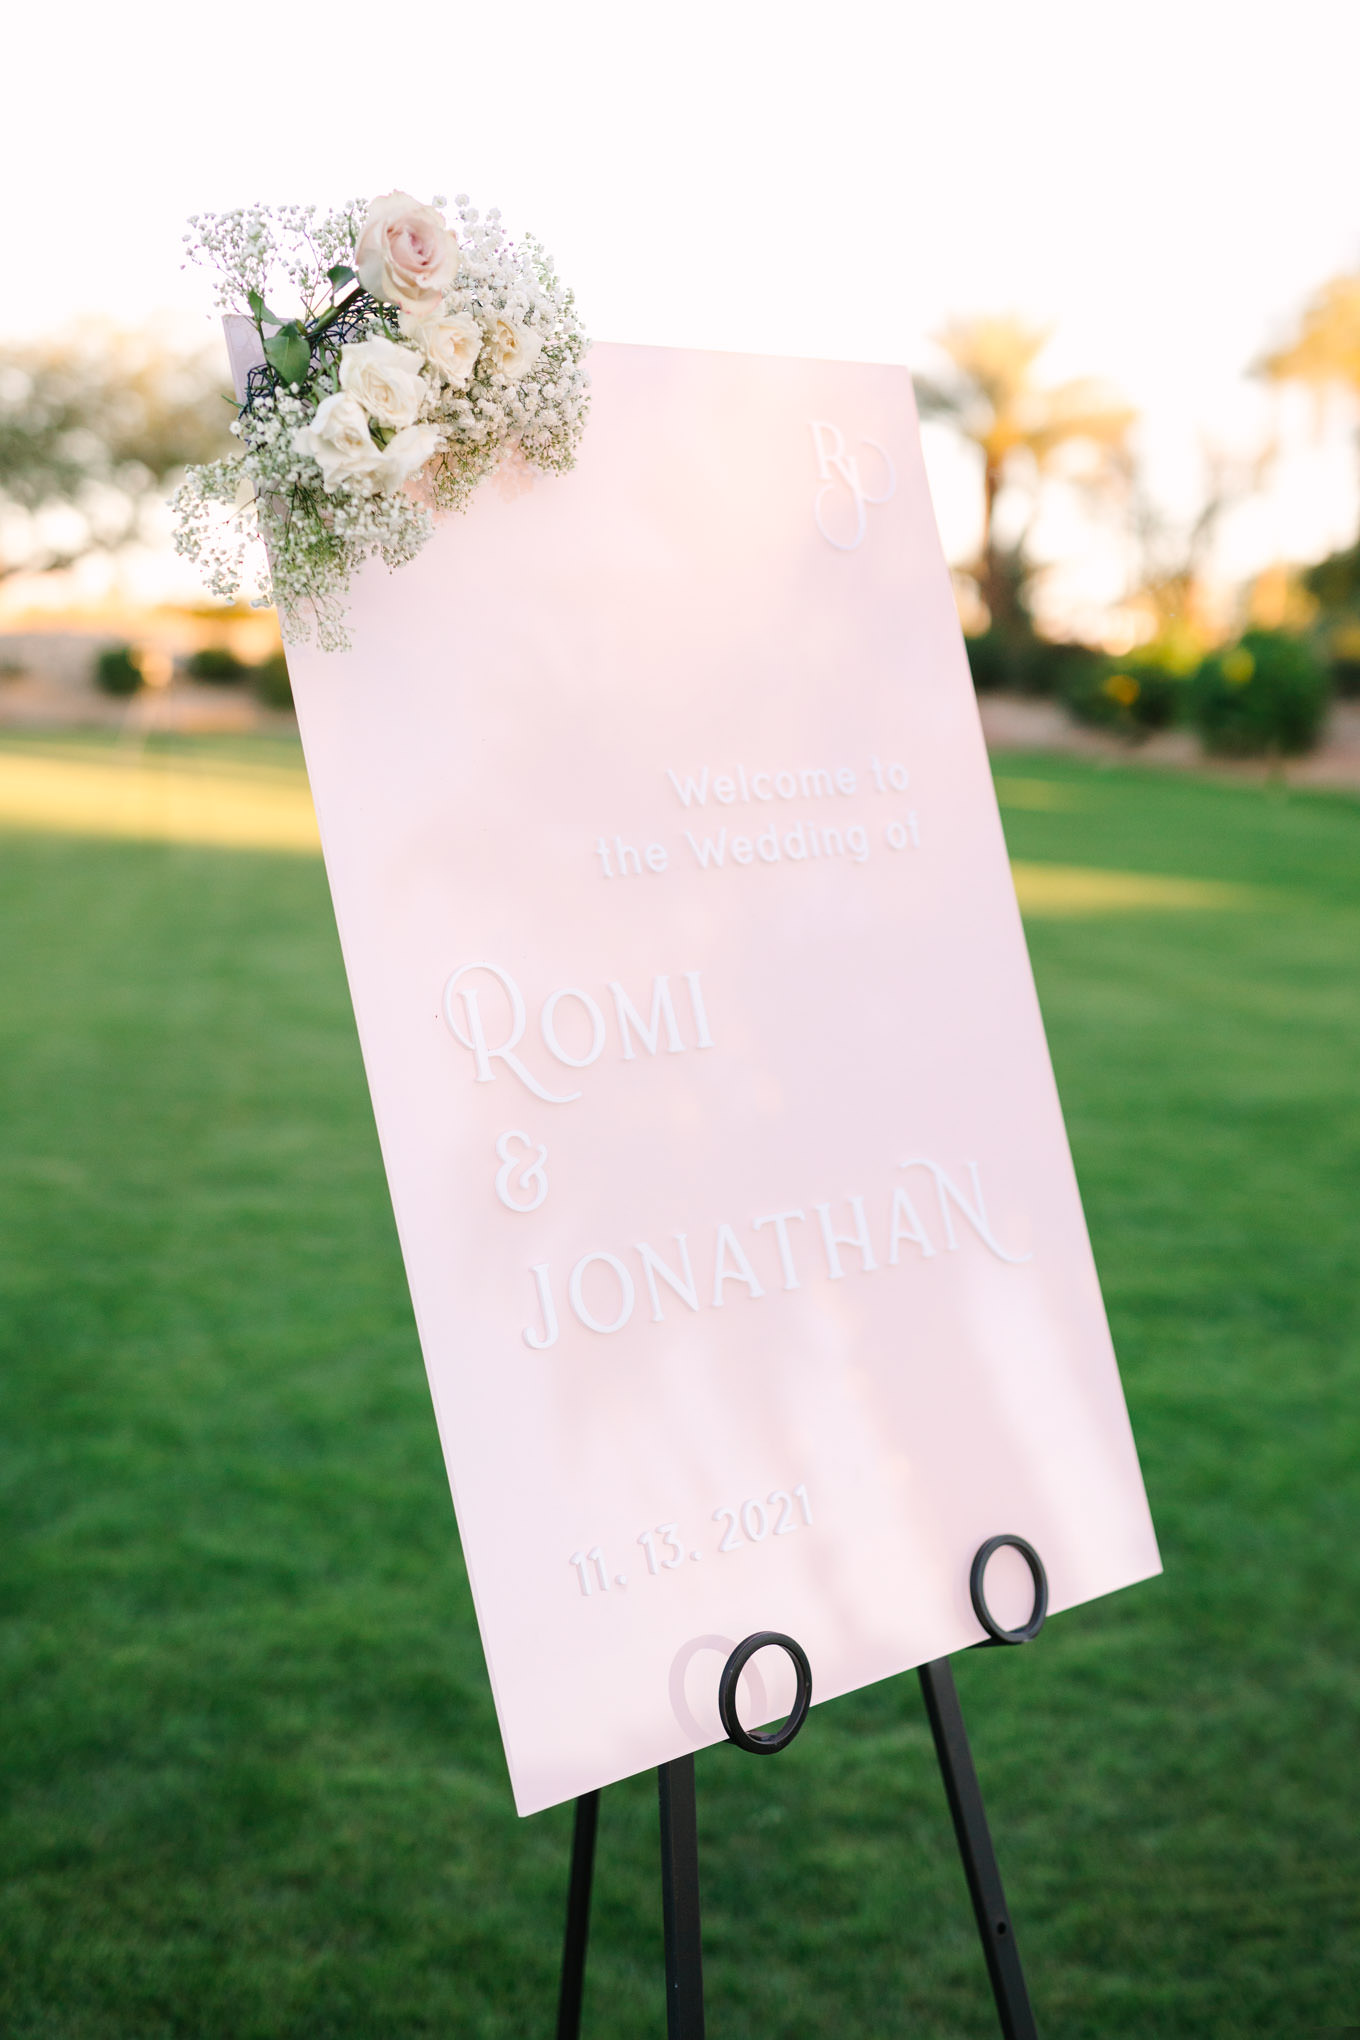 Wedding welcome sign | Pink Bougainvillea Estate wedding | Colorful LA wedding photography | #bougainvilleaestate #palmspringswedding #palmspringsweddingvenue #palmspringsphotographer Source: Mary Costa Photography | Los Angeles